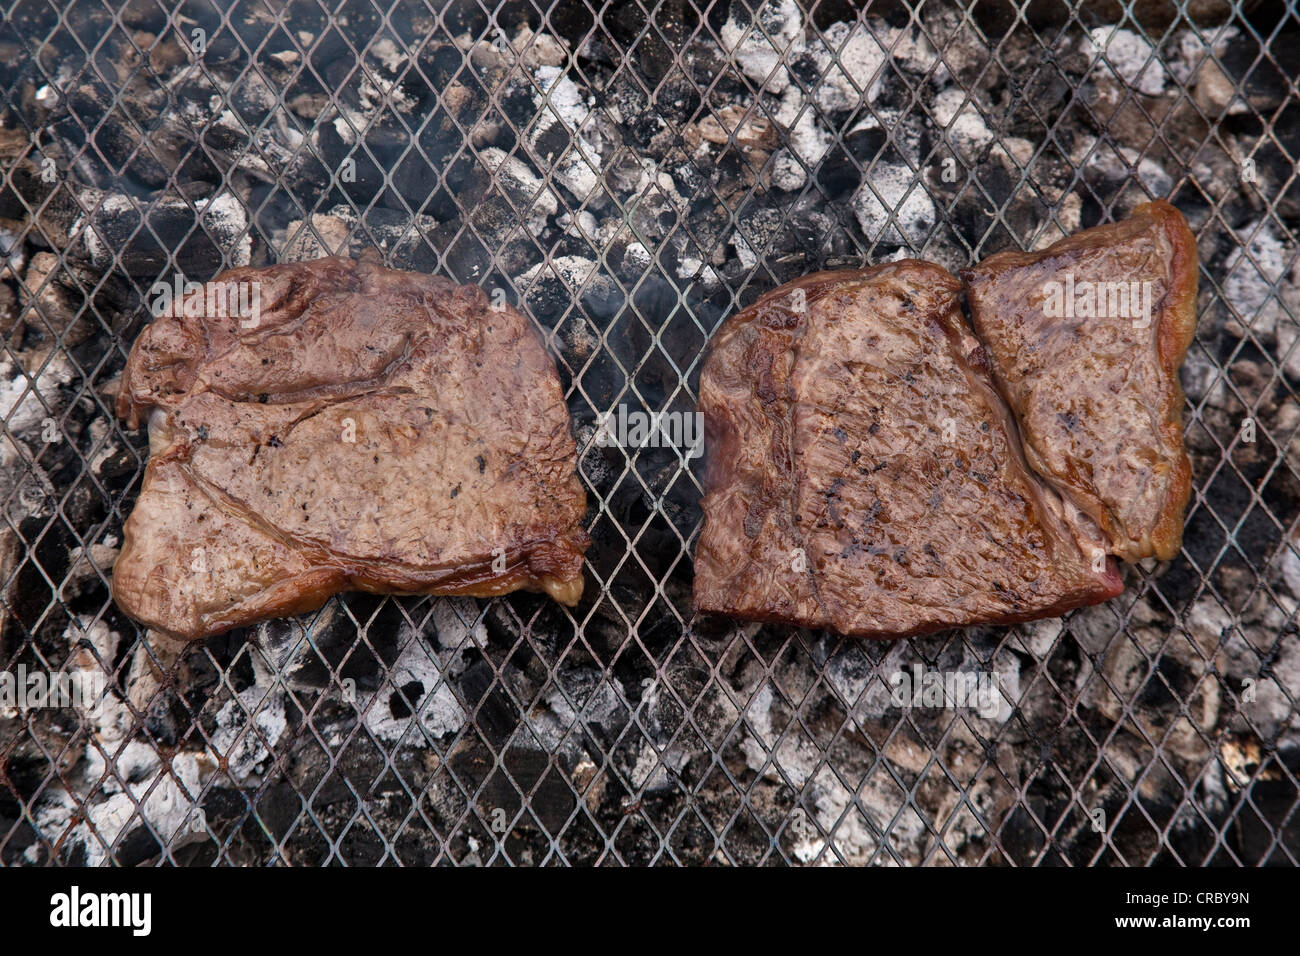 Rump steak cooking on a charcoal barbecue. Stock Photo